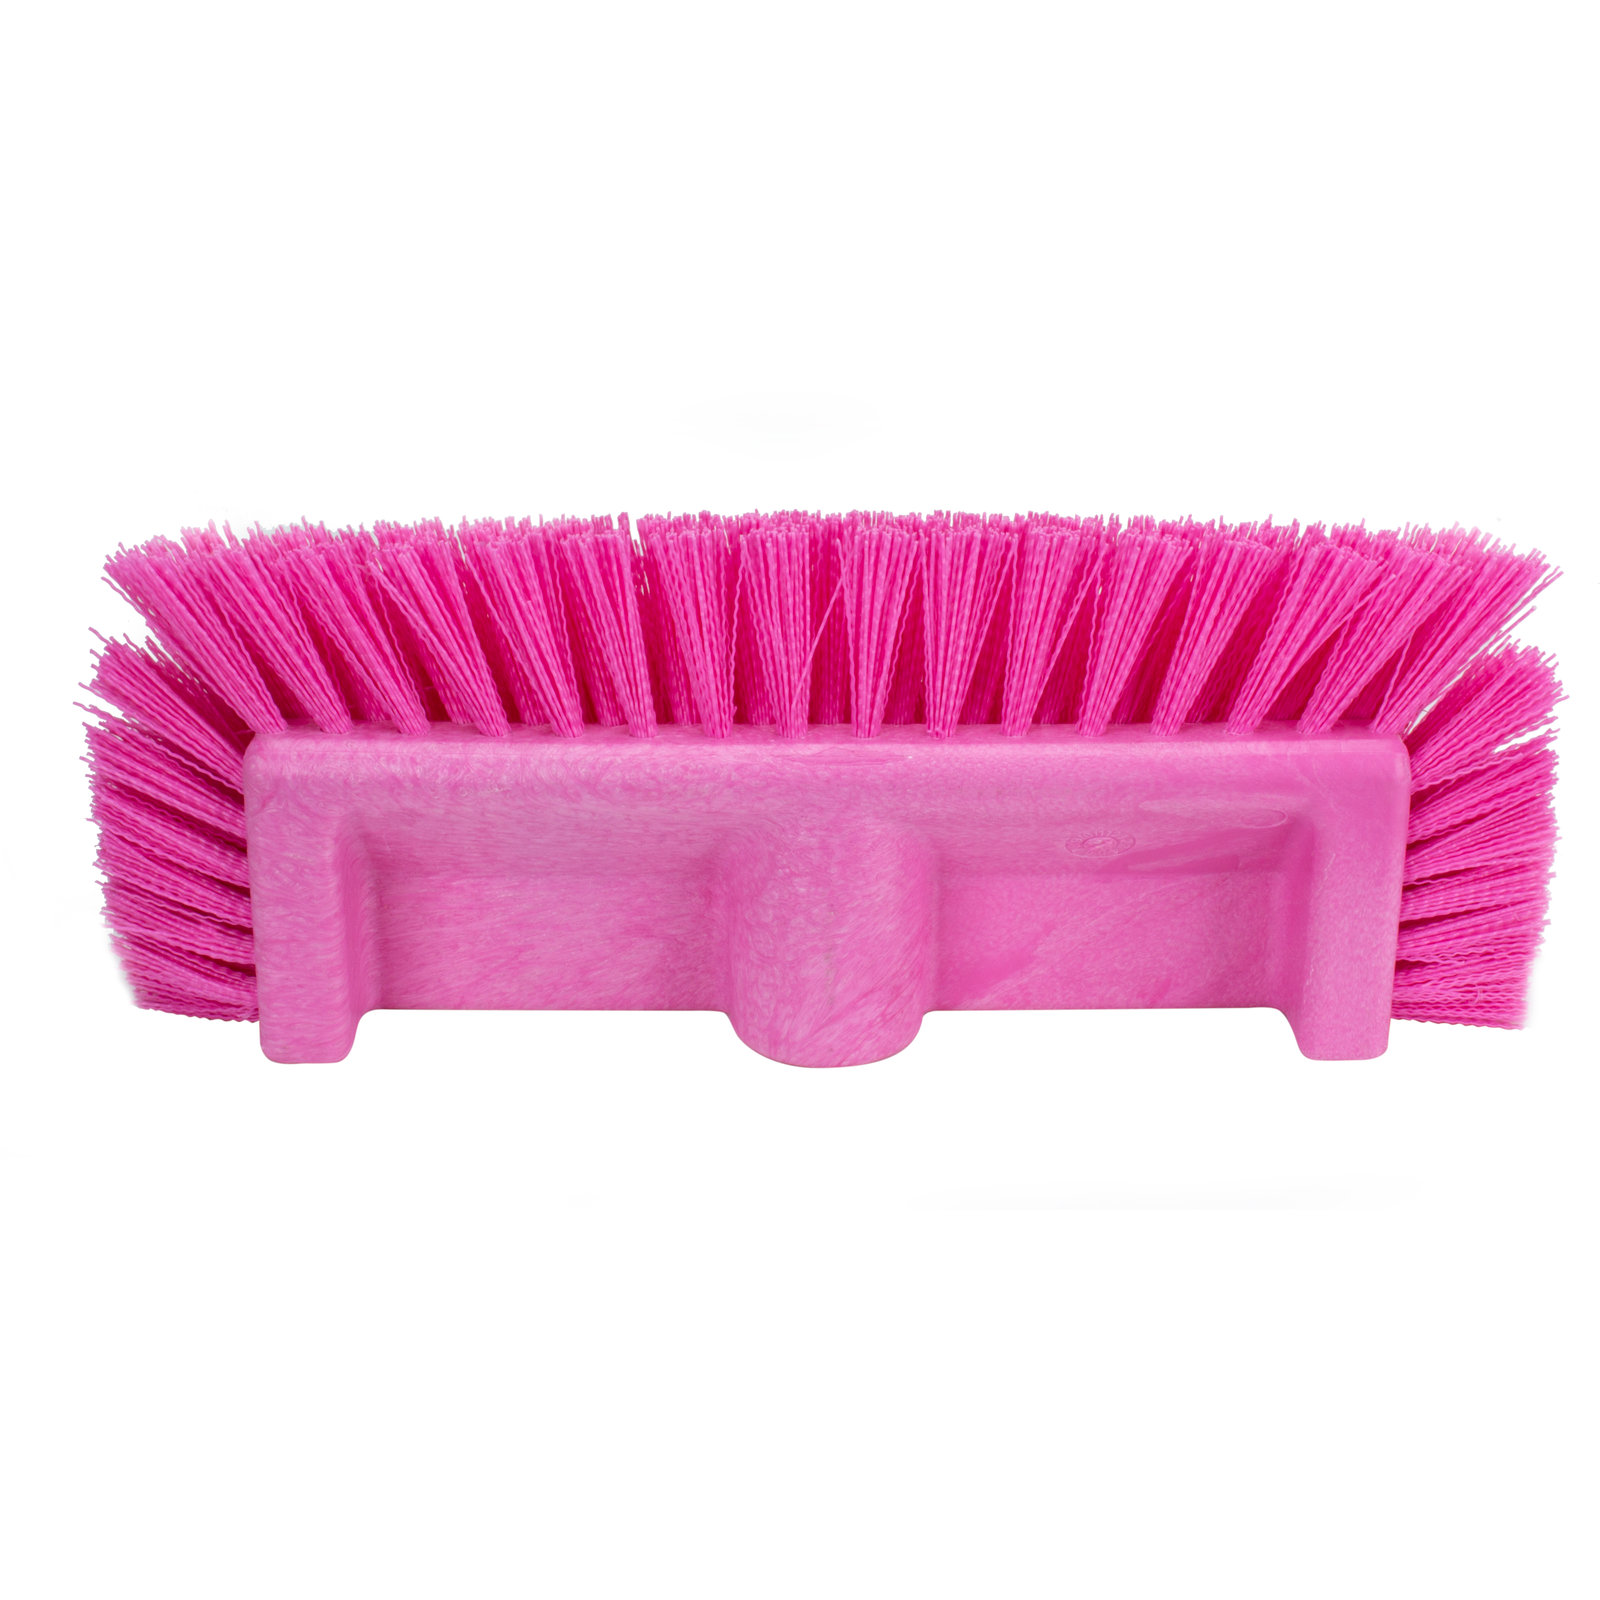 40422EC26 - Color Coded Mult-Level Floor Scrub Brush with End Bristles 12  - Pink